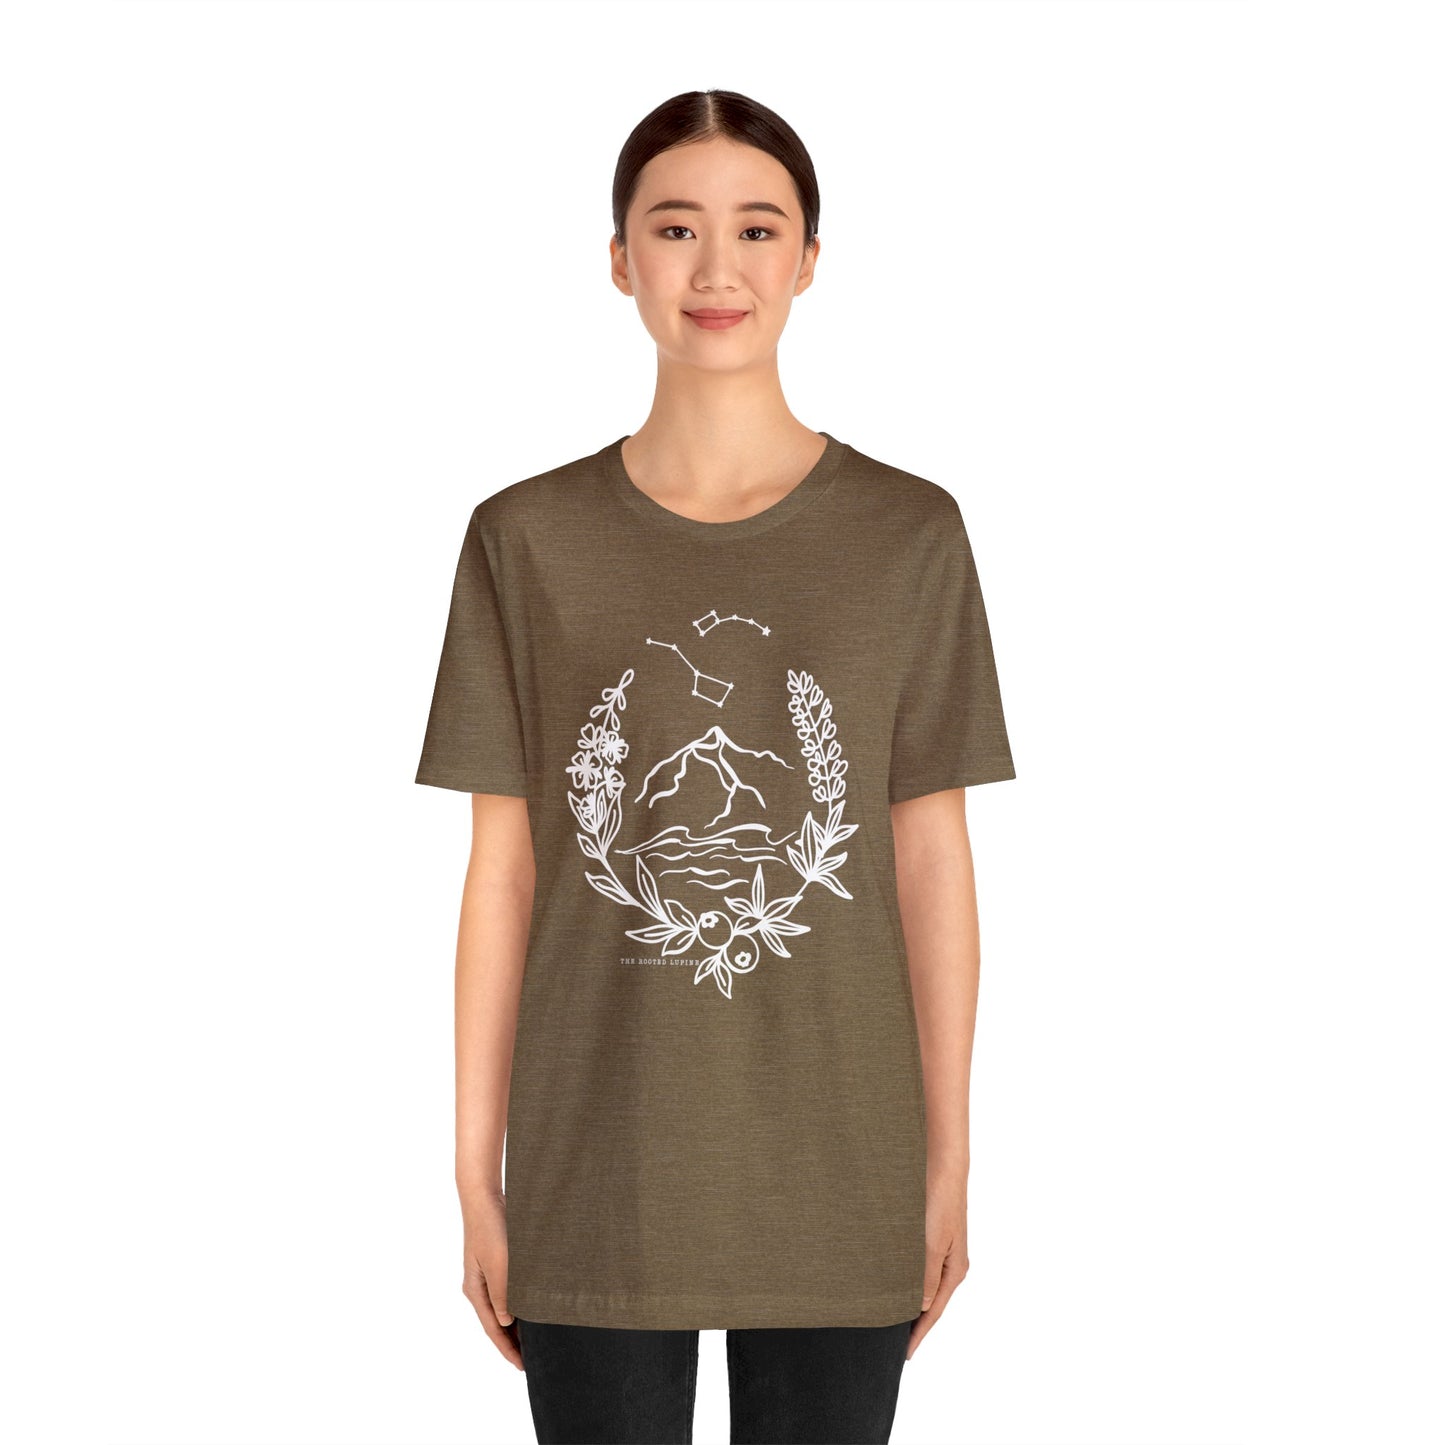 Mountains & Wild things Jersey T